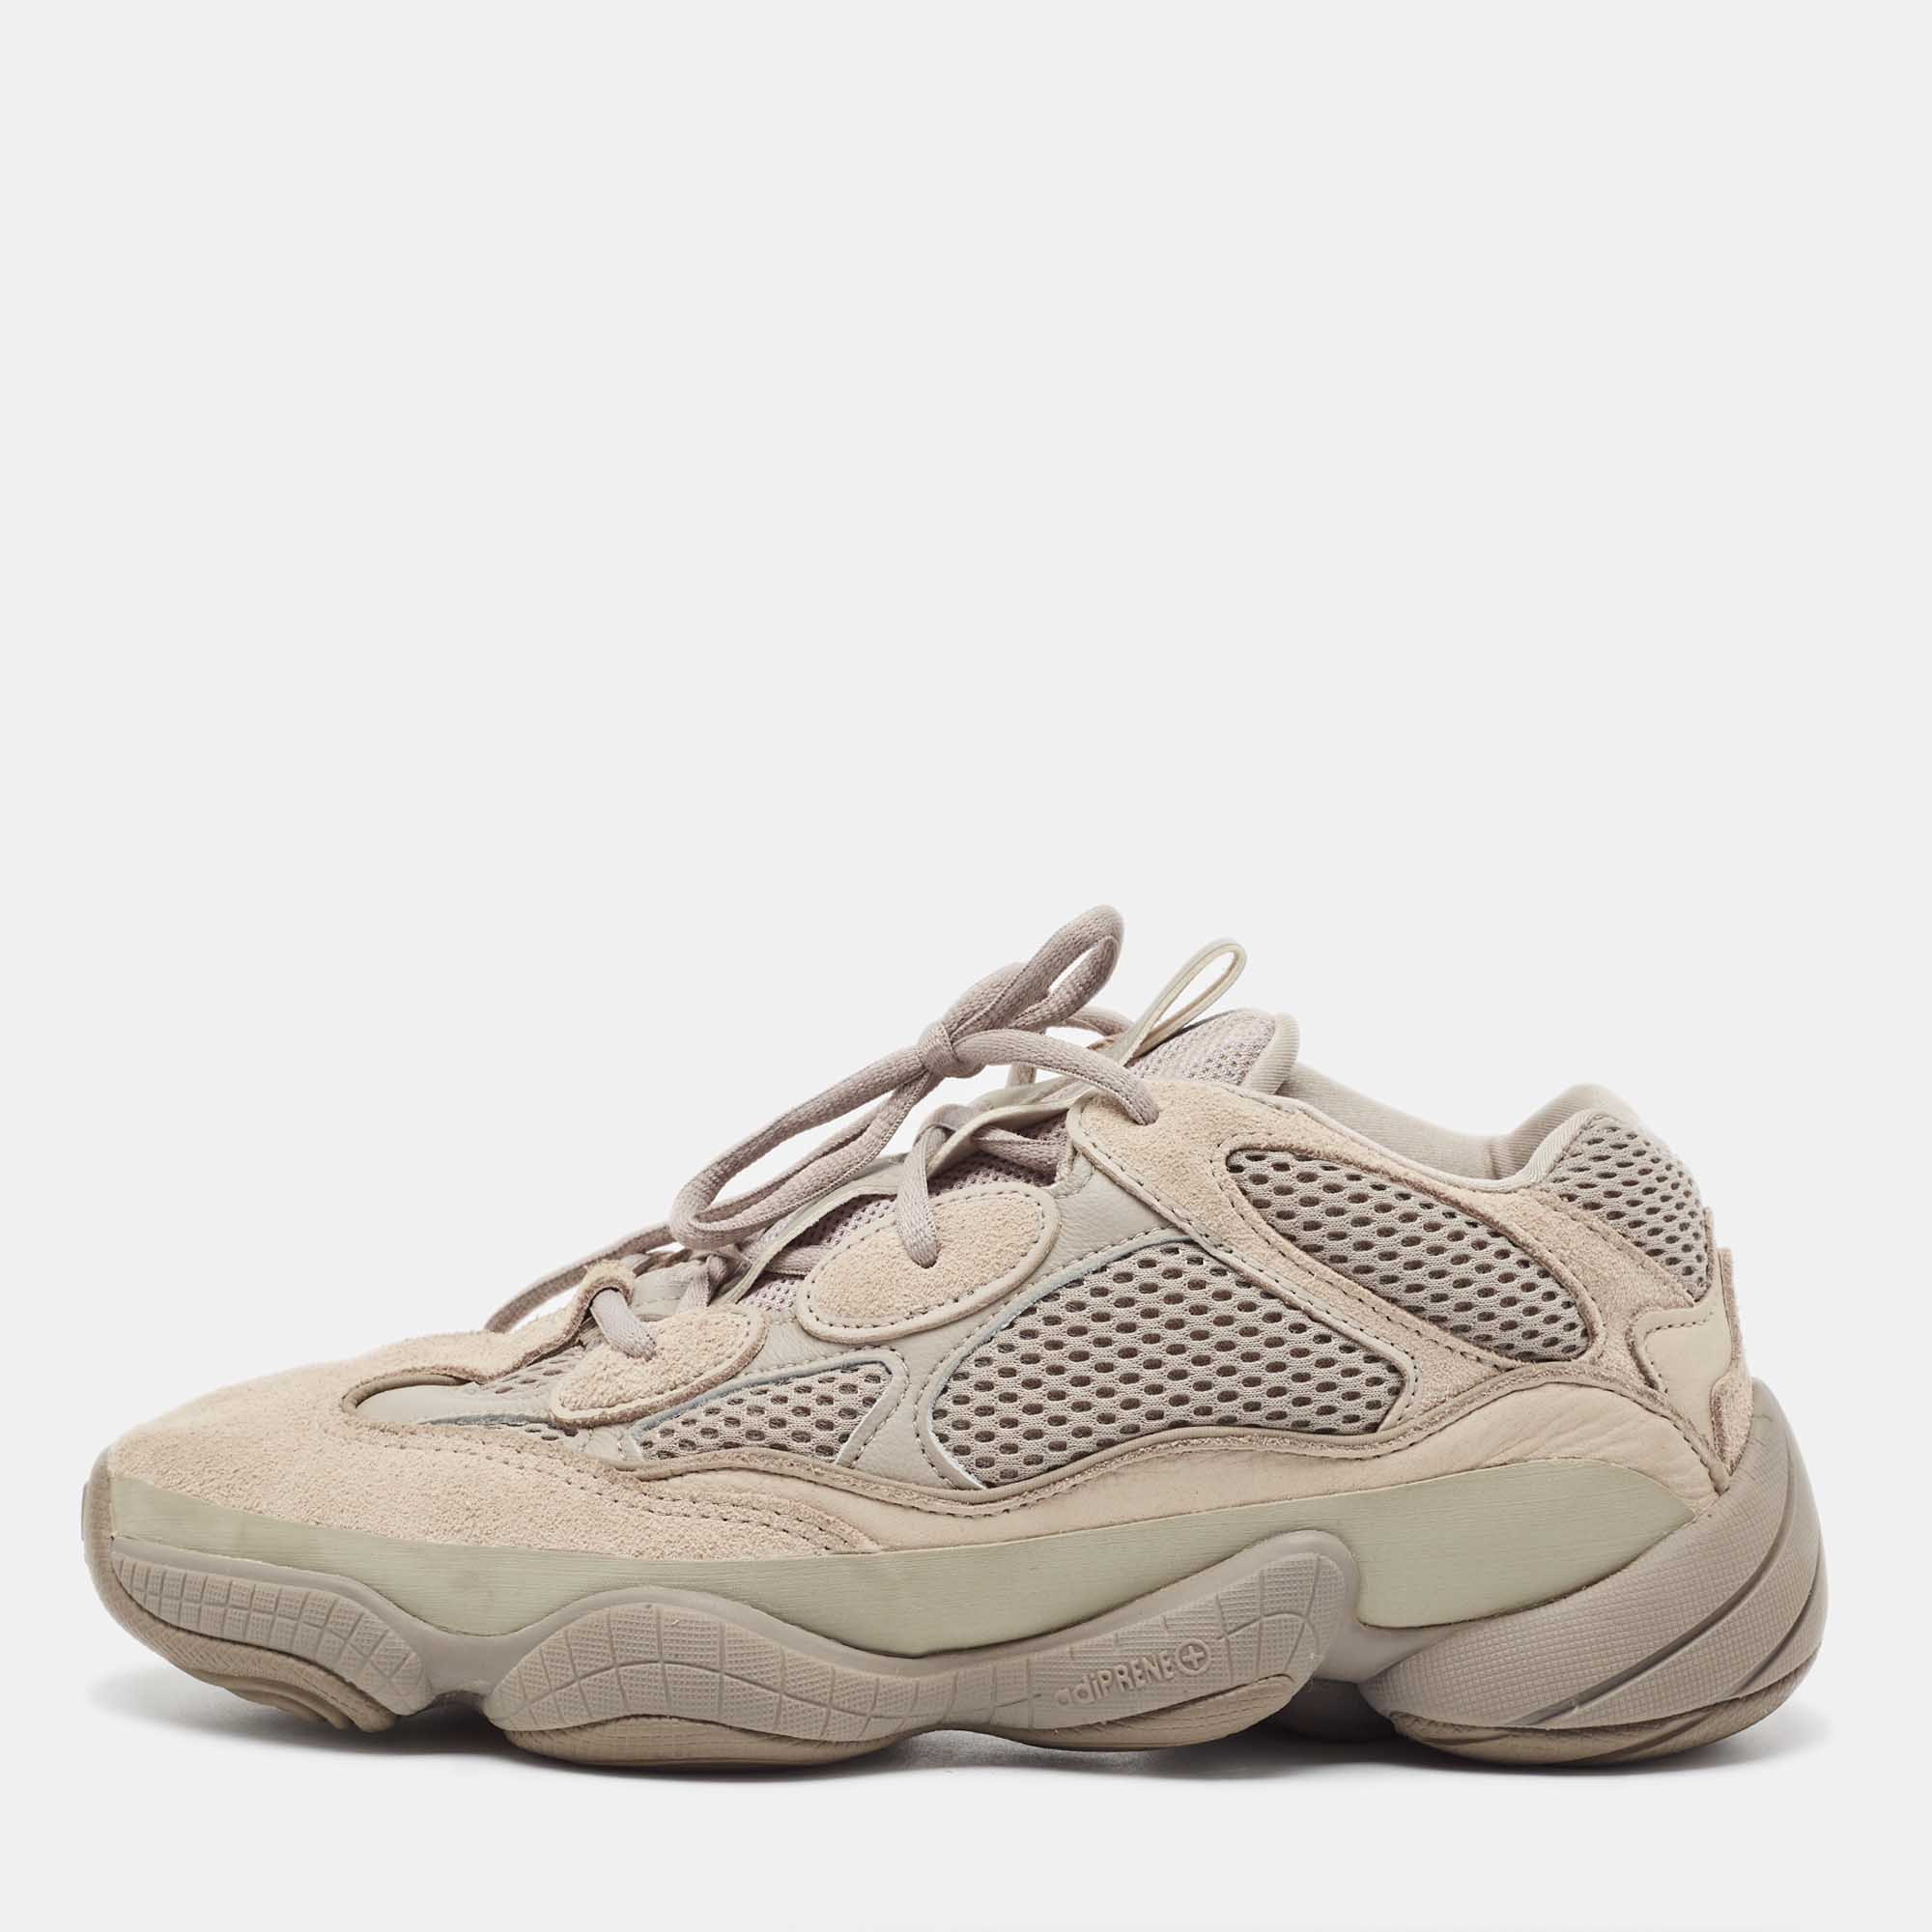 Pre-owned Yeezy X Adidas Ash Grey Mesh And Suede Yeezy 500 Sneakers Size 42 2/3